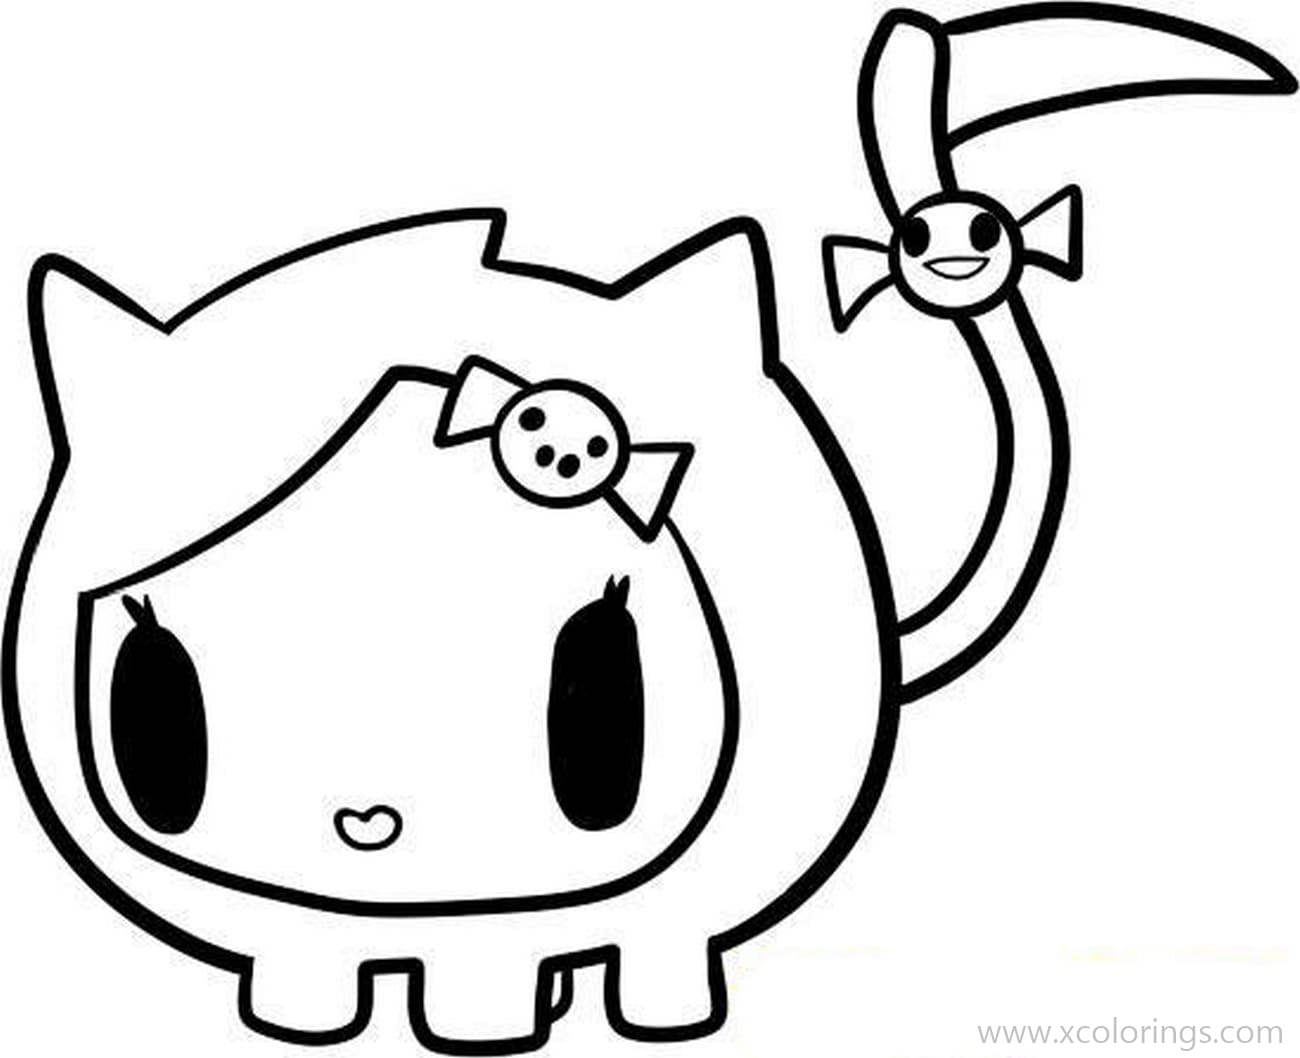 Free Tokidoki Cat Coloring Pages with Bow printable